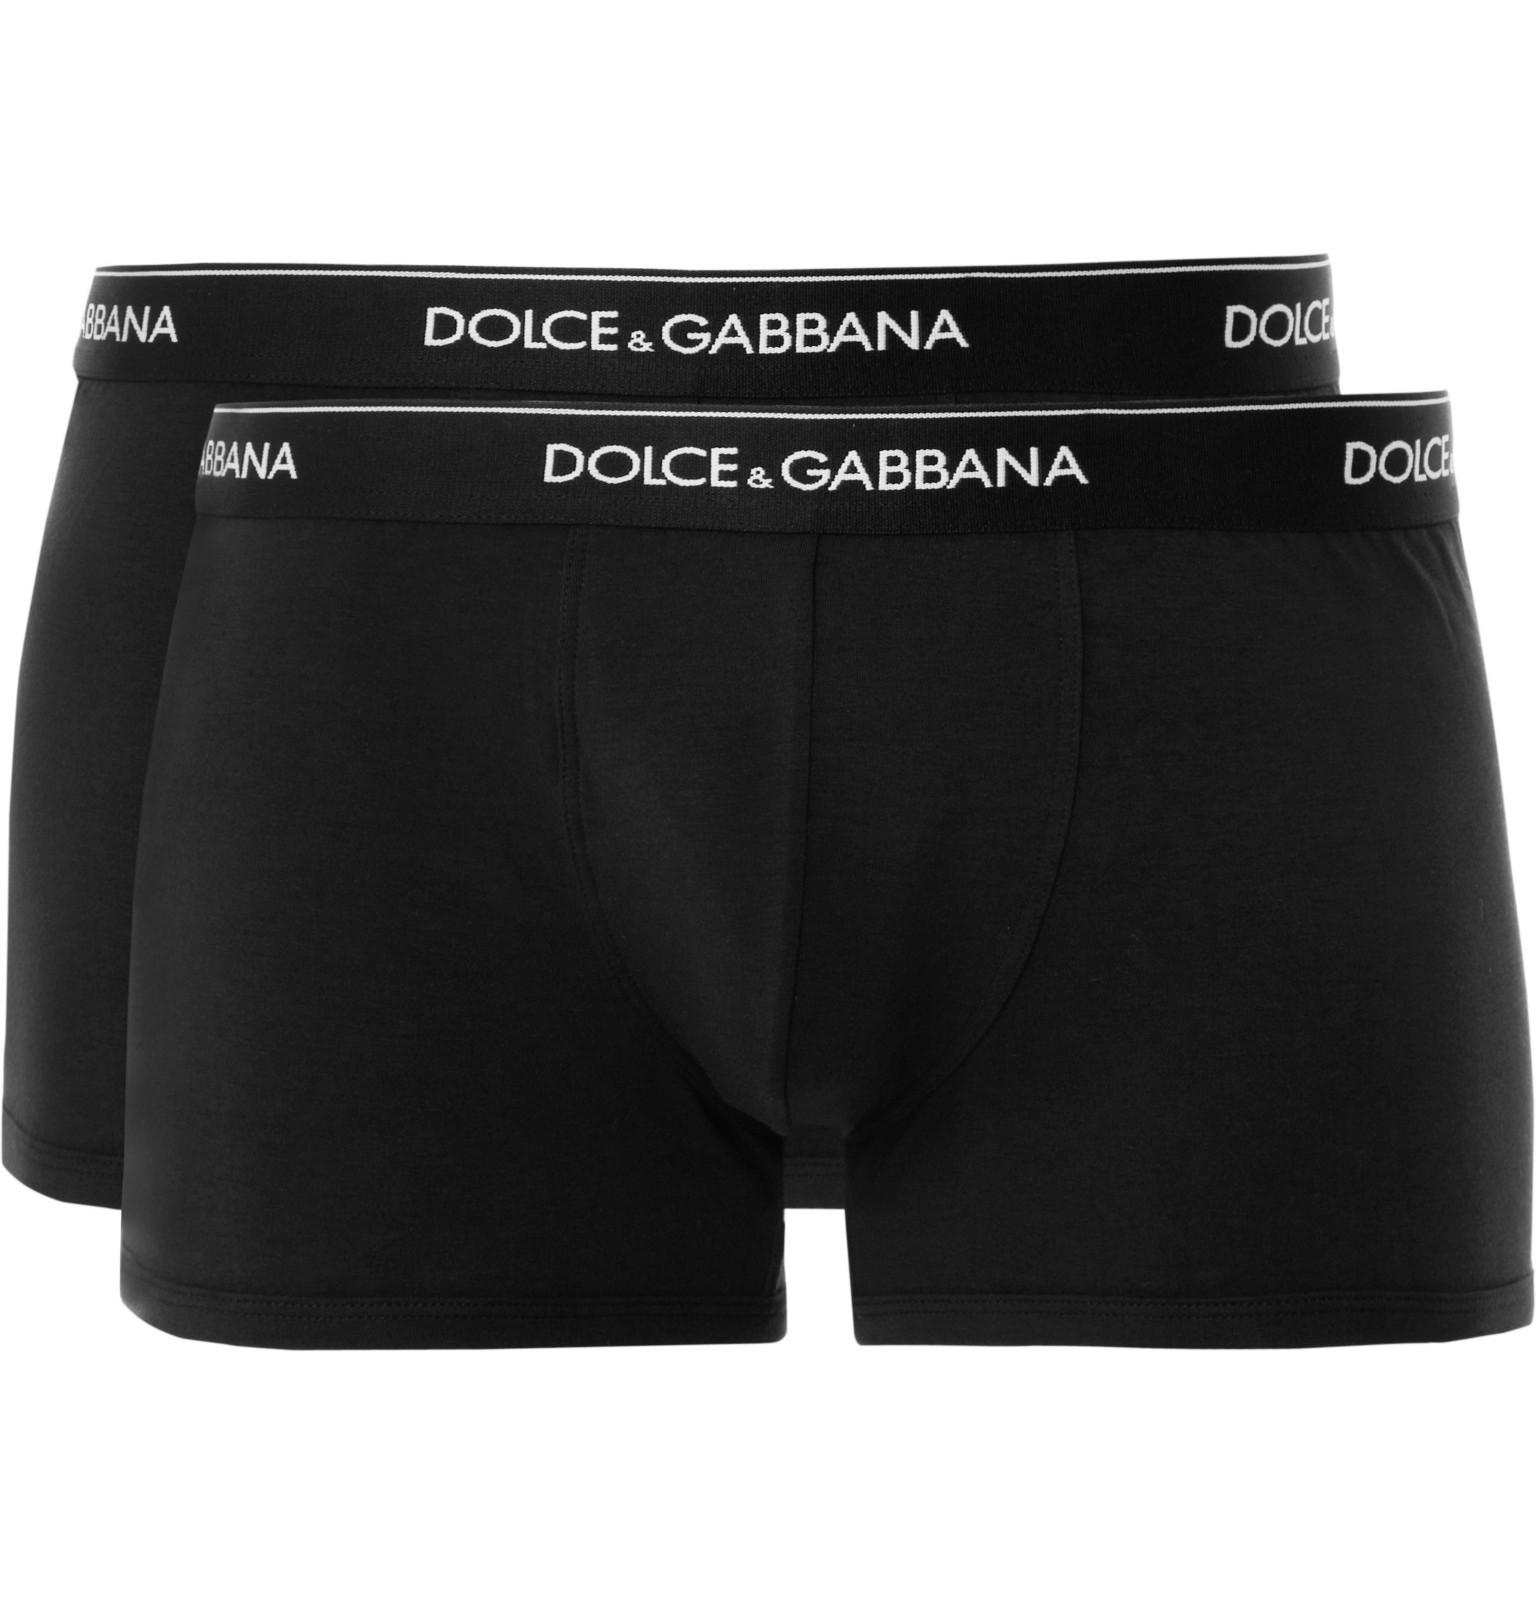 Dolce & Gabbana Two-pack Stretch-cotton Briefs in Black for Men - Lyst